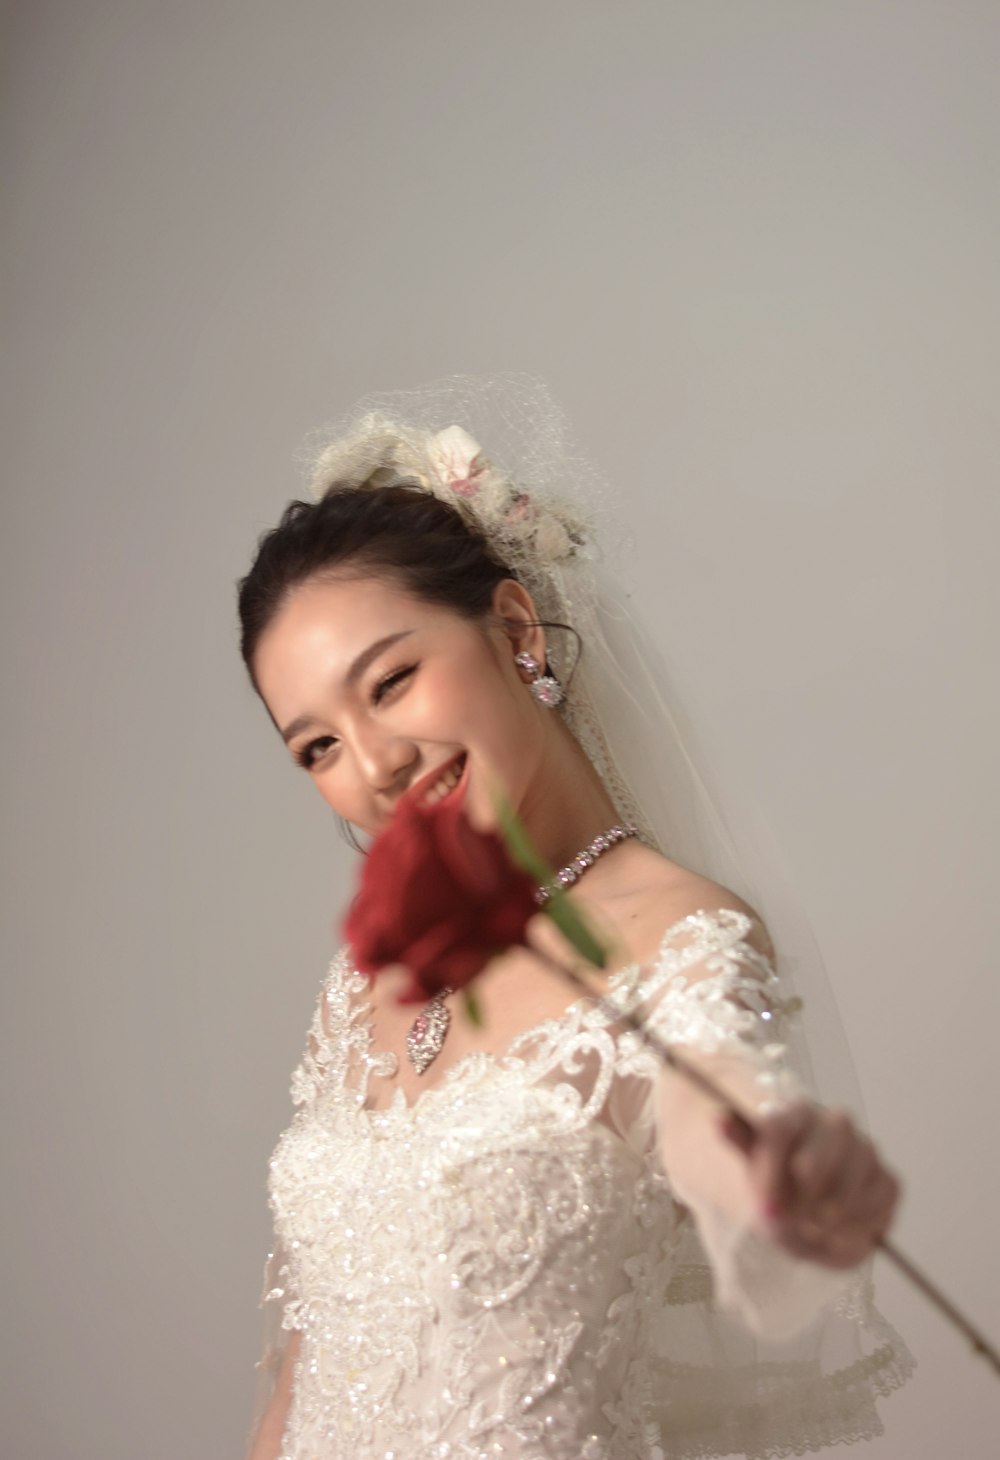 a woman in a wedding dress holding a rose